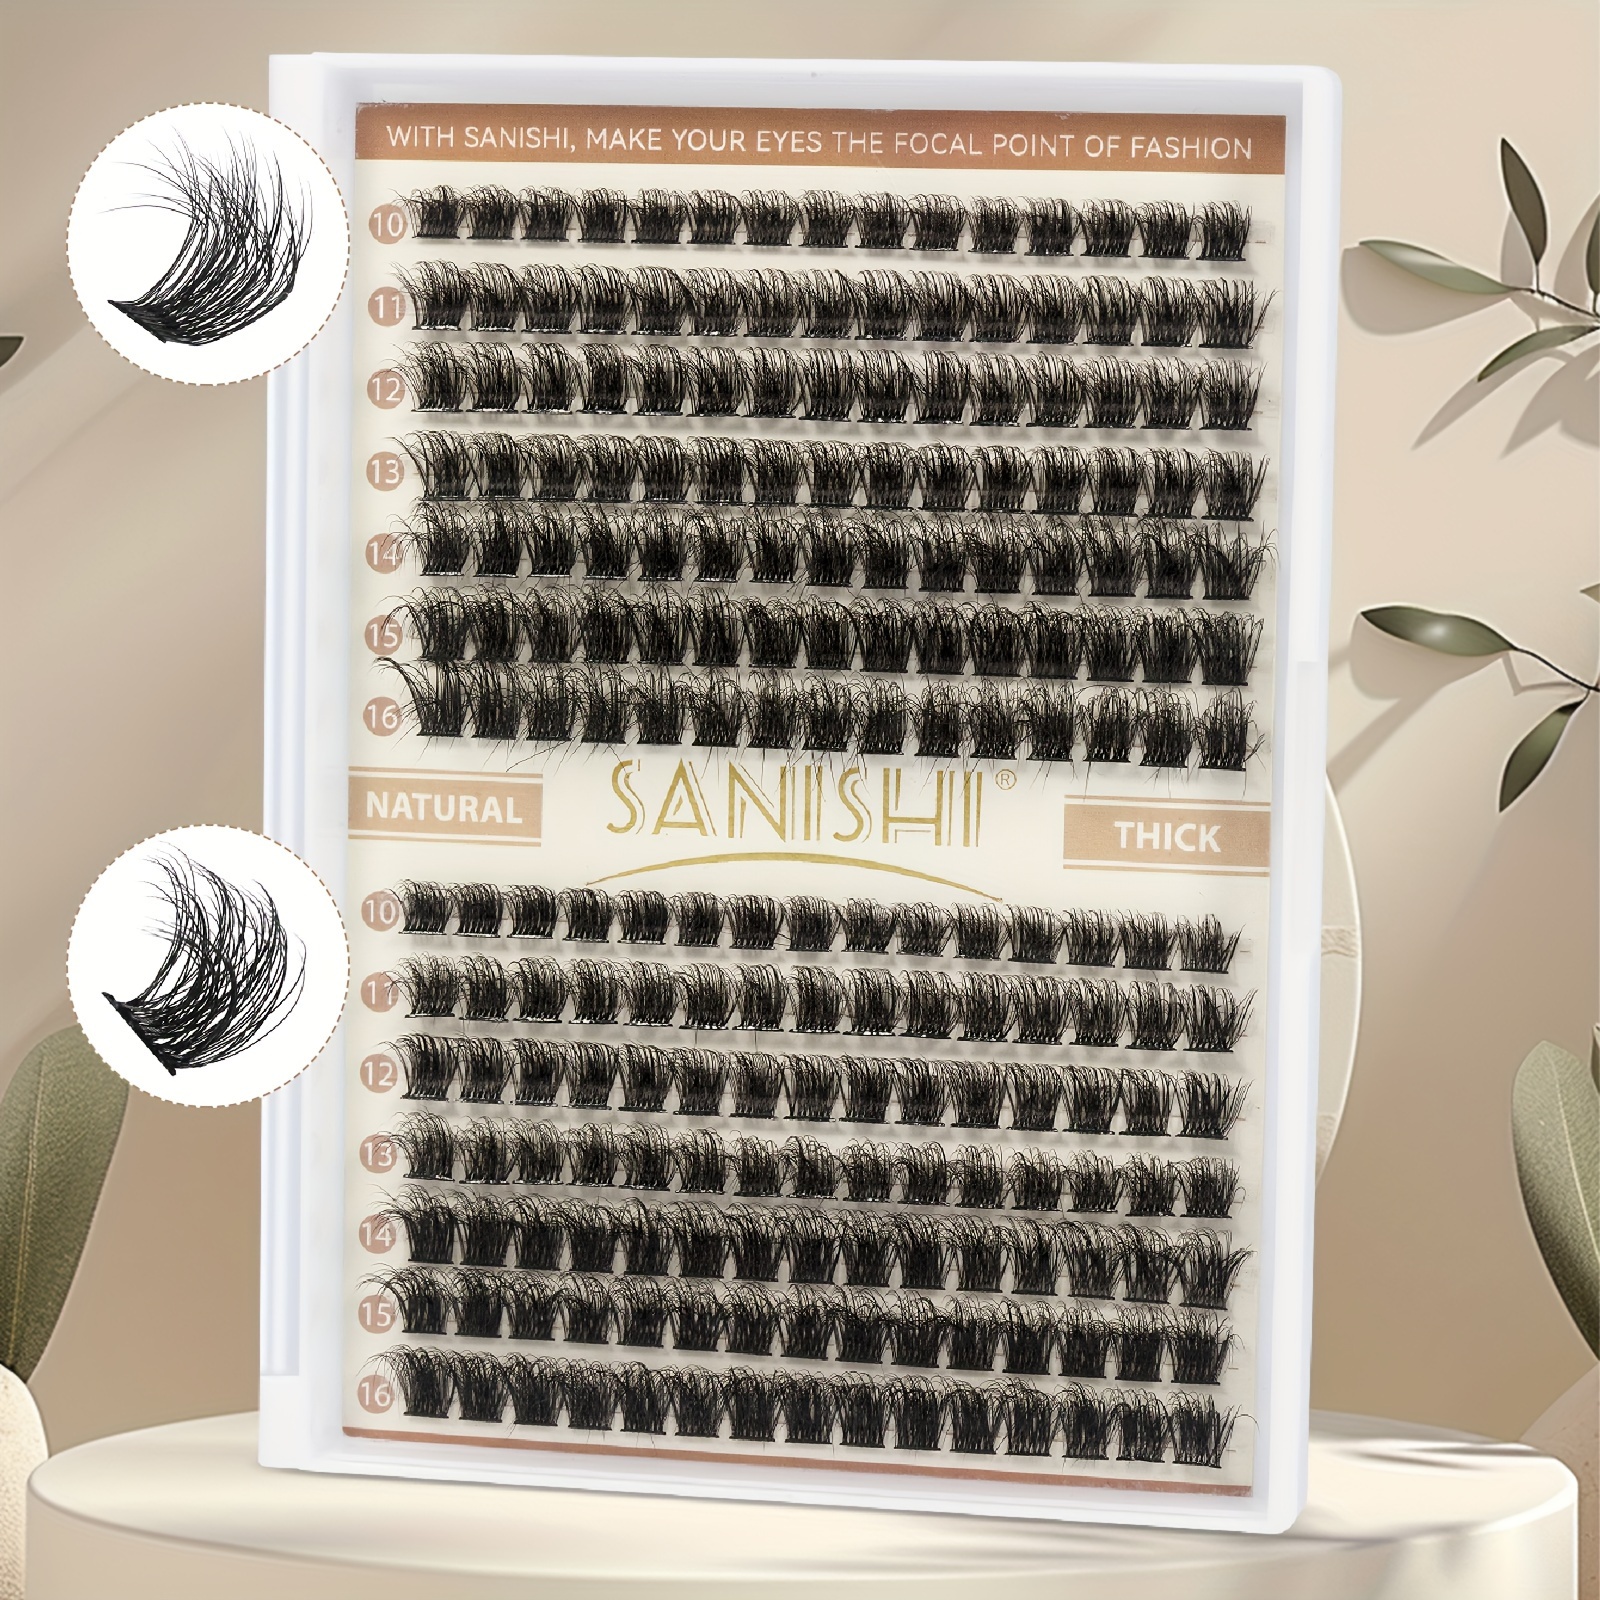 

Sanishi 5d Fluffy Volume Eyelash Extensions - 210pcs Mixed Lengths (10-16mm) Cluster Lashes, Diy Easy-to-apply & Reusable For Beginners